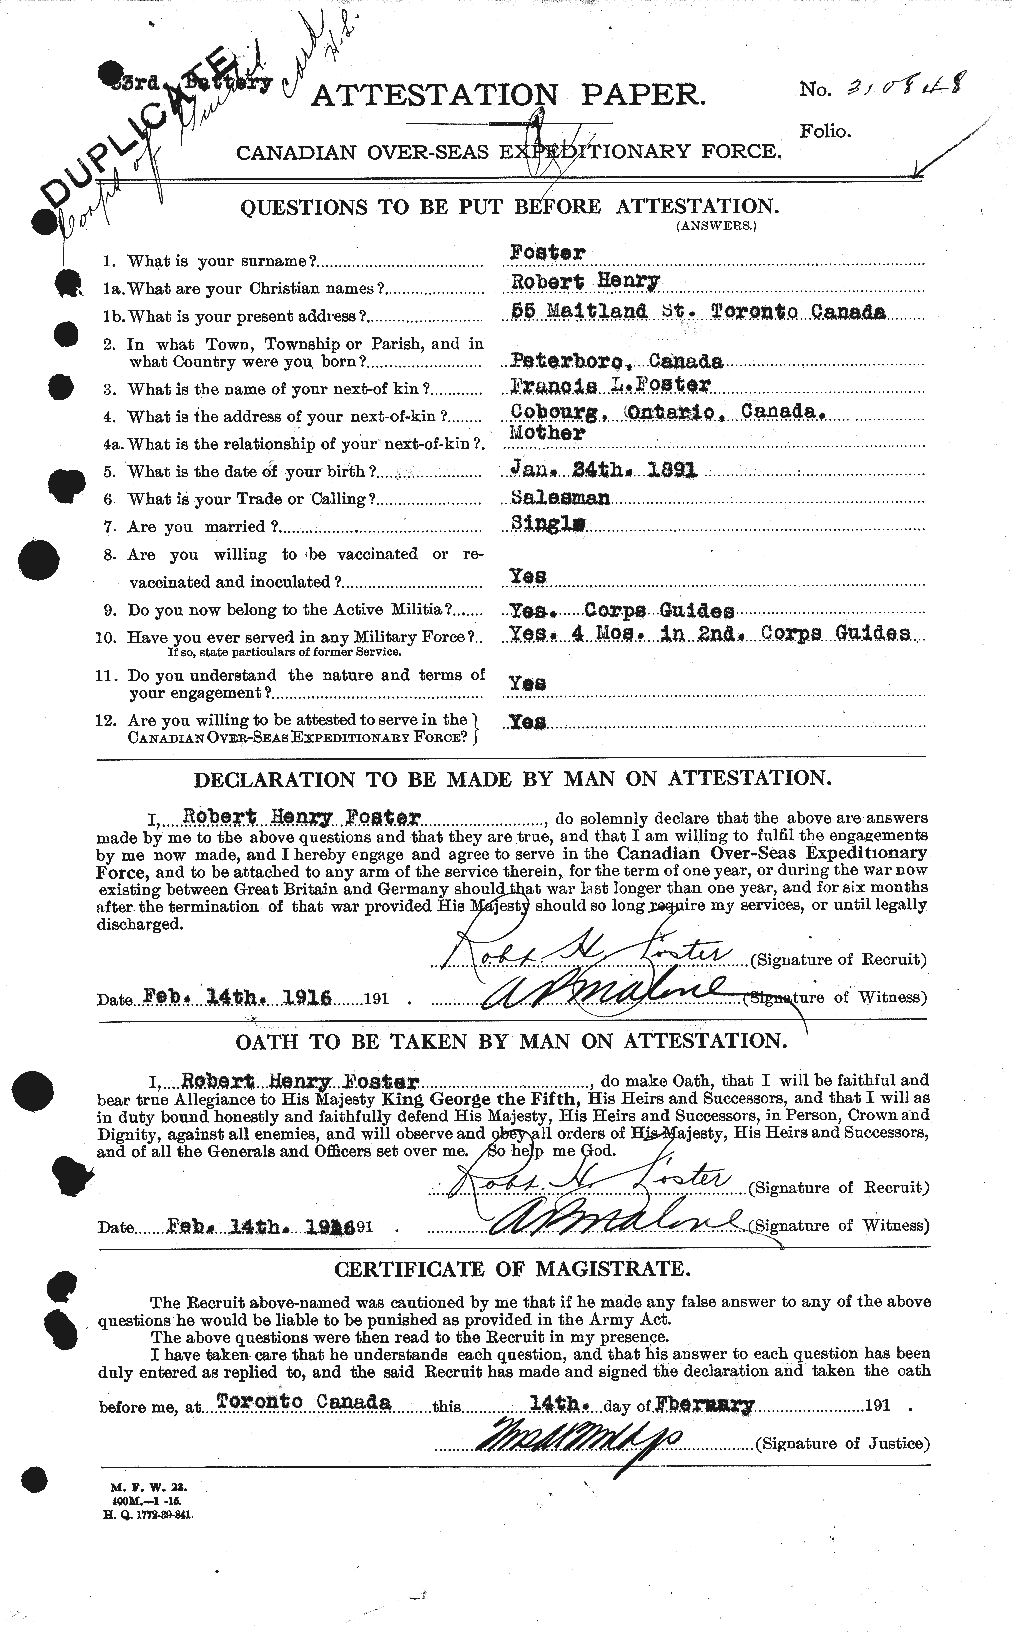 Personnel Records of the First World War - CEF 335177a